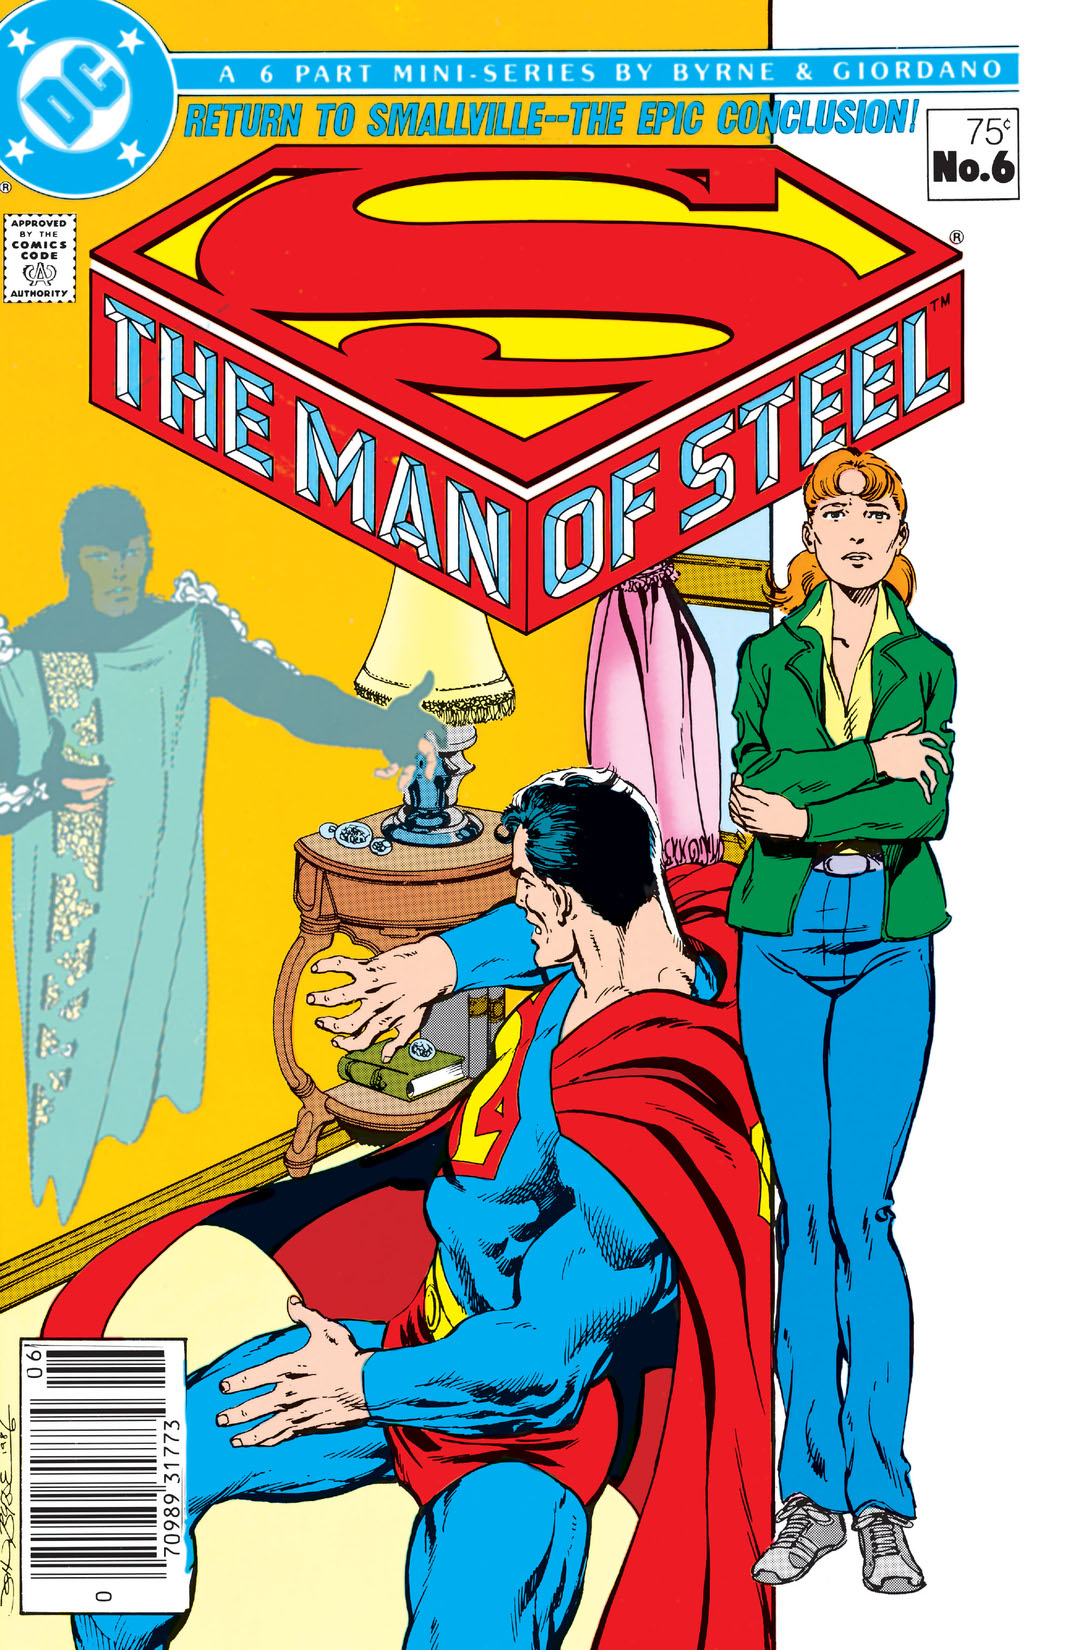 The Man of Steel #6 preview images